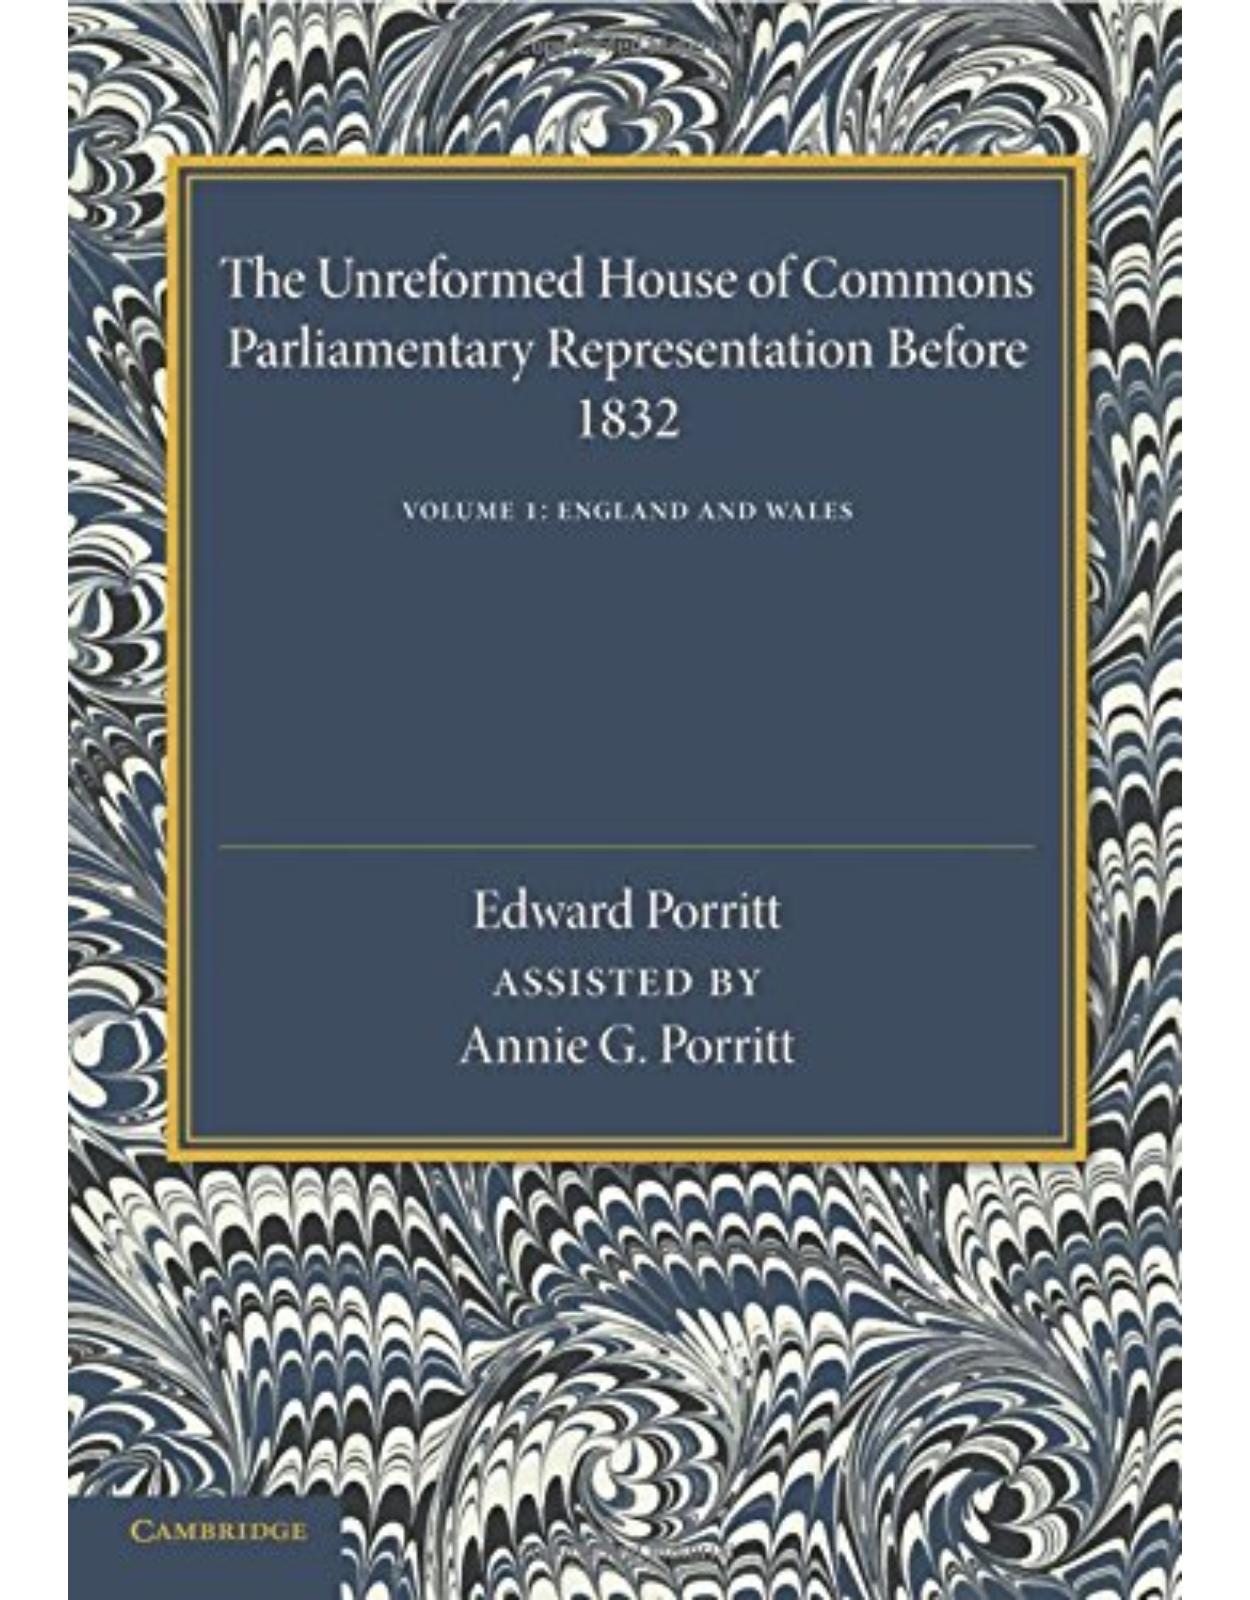 The Unreformed House of Commons: Volume 1, England and Wales: Parliamentary Representation Before 1832